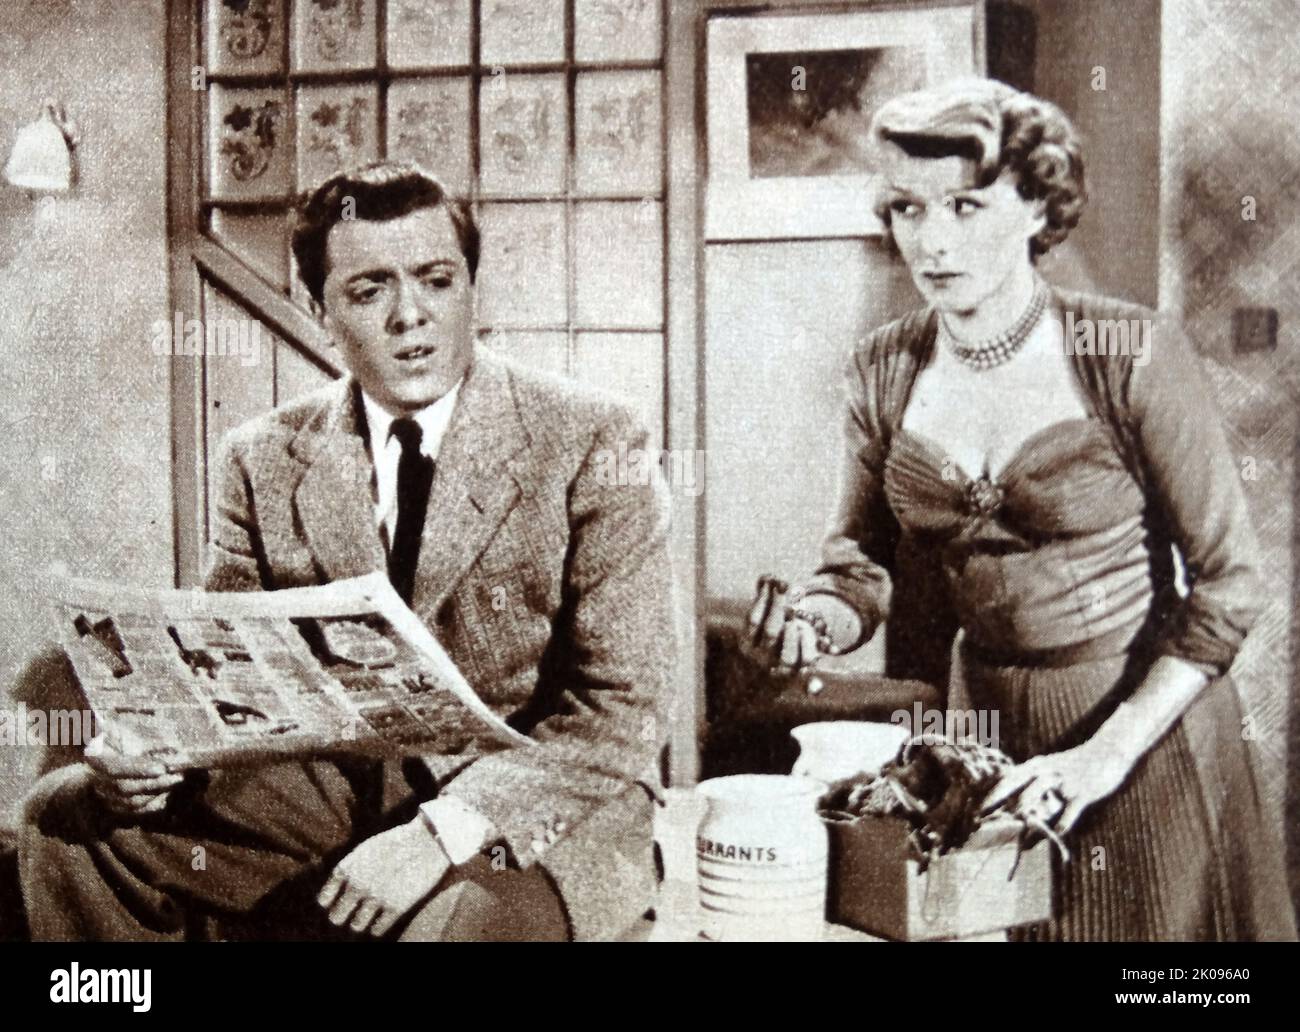 Heather Thatcher and Richard Attenborough in Father's Doing Fine, a 1952 British comedy film. Heather Thatcher (3 September 1896 - 15 January 1987)[1] was an English actress in theatre and films. Richard Samuel Attenborough, Baron Attenborough, CBE, FRSA (29 August 1923 - 24 August 2014) was an English actor, filmmaker, and entrepreneur. Stock Photo